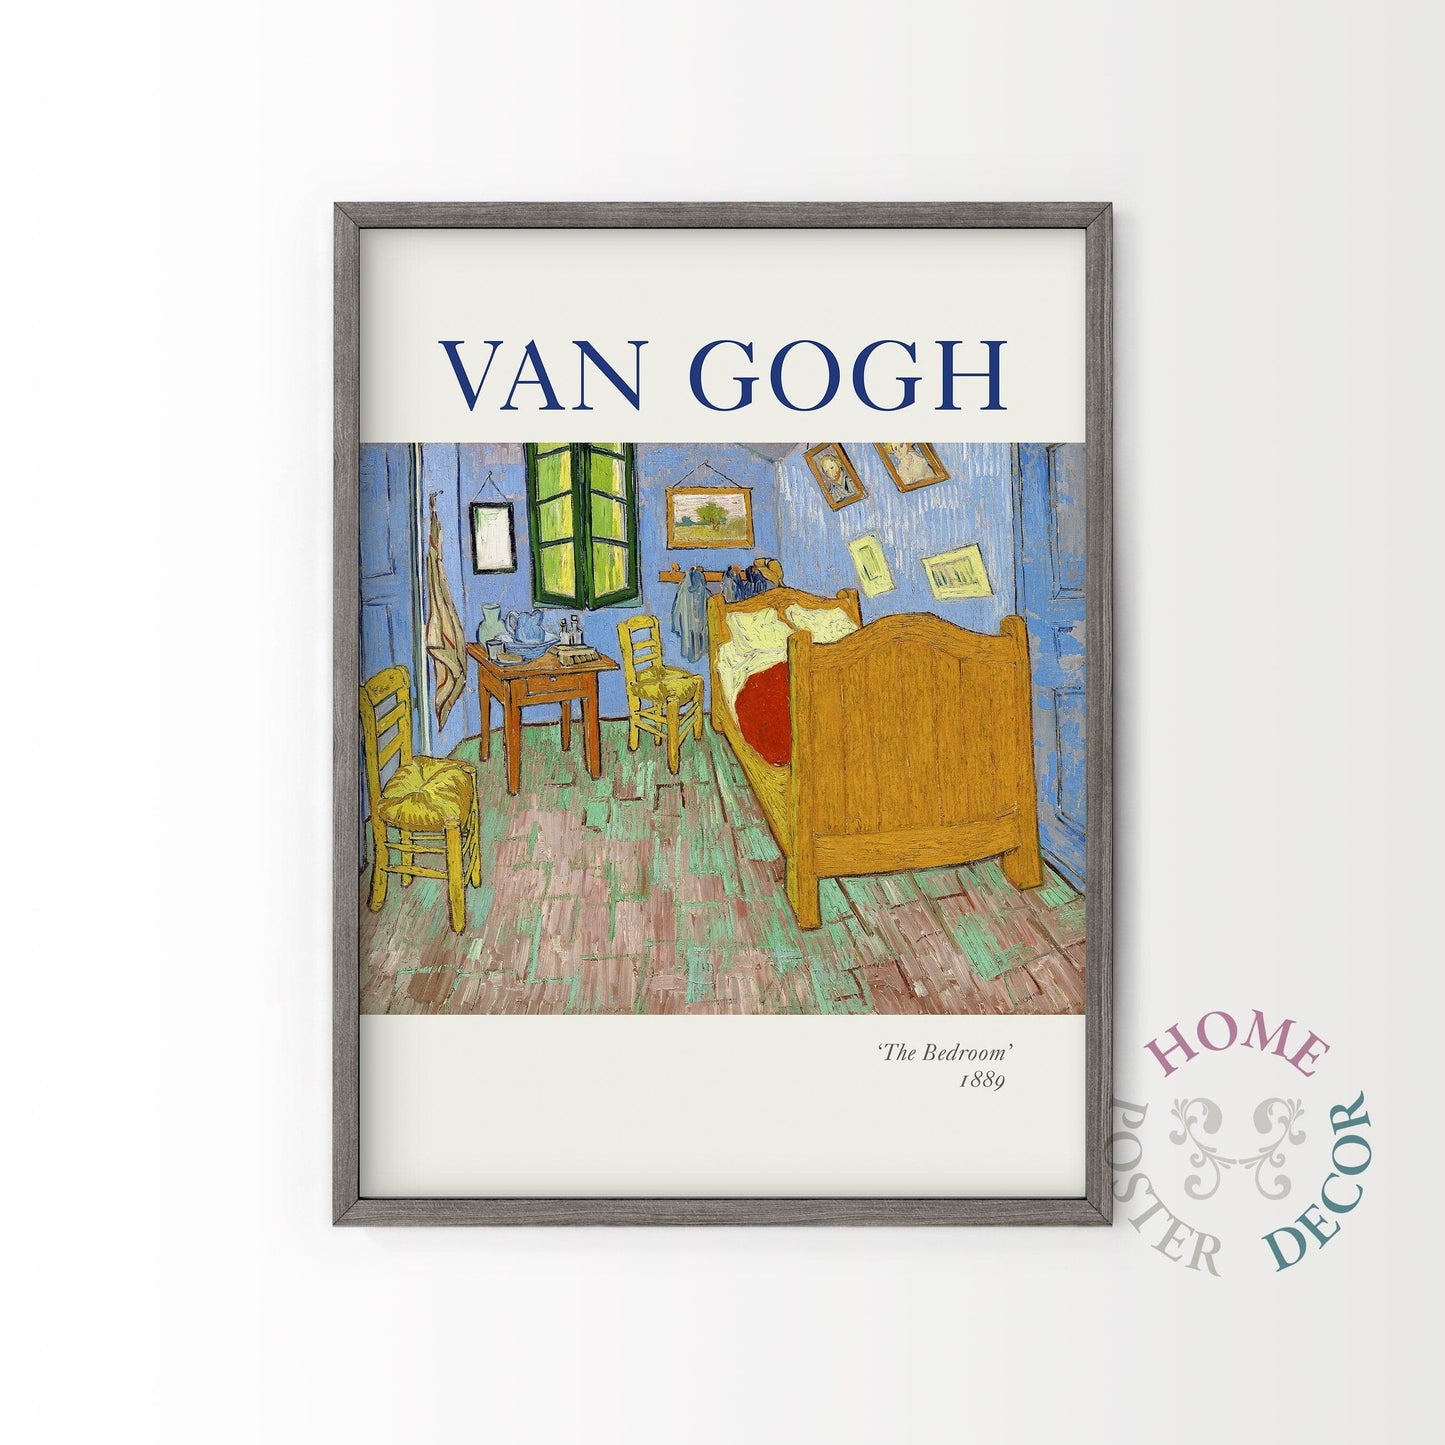 Home Poster Decor Single Van Gogh Print, The Bedroom, Famous Painting, Post-impressionist, Anniversary Gift